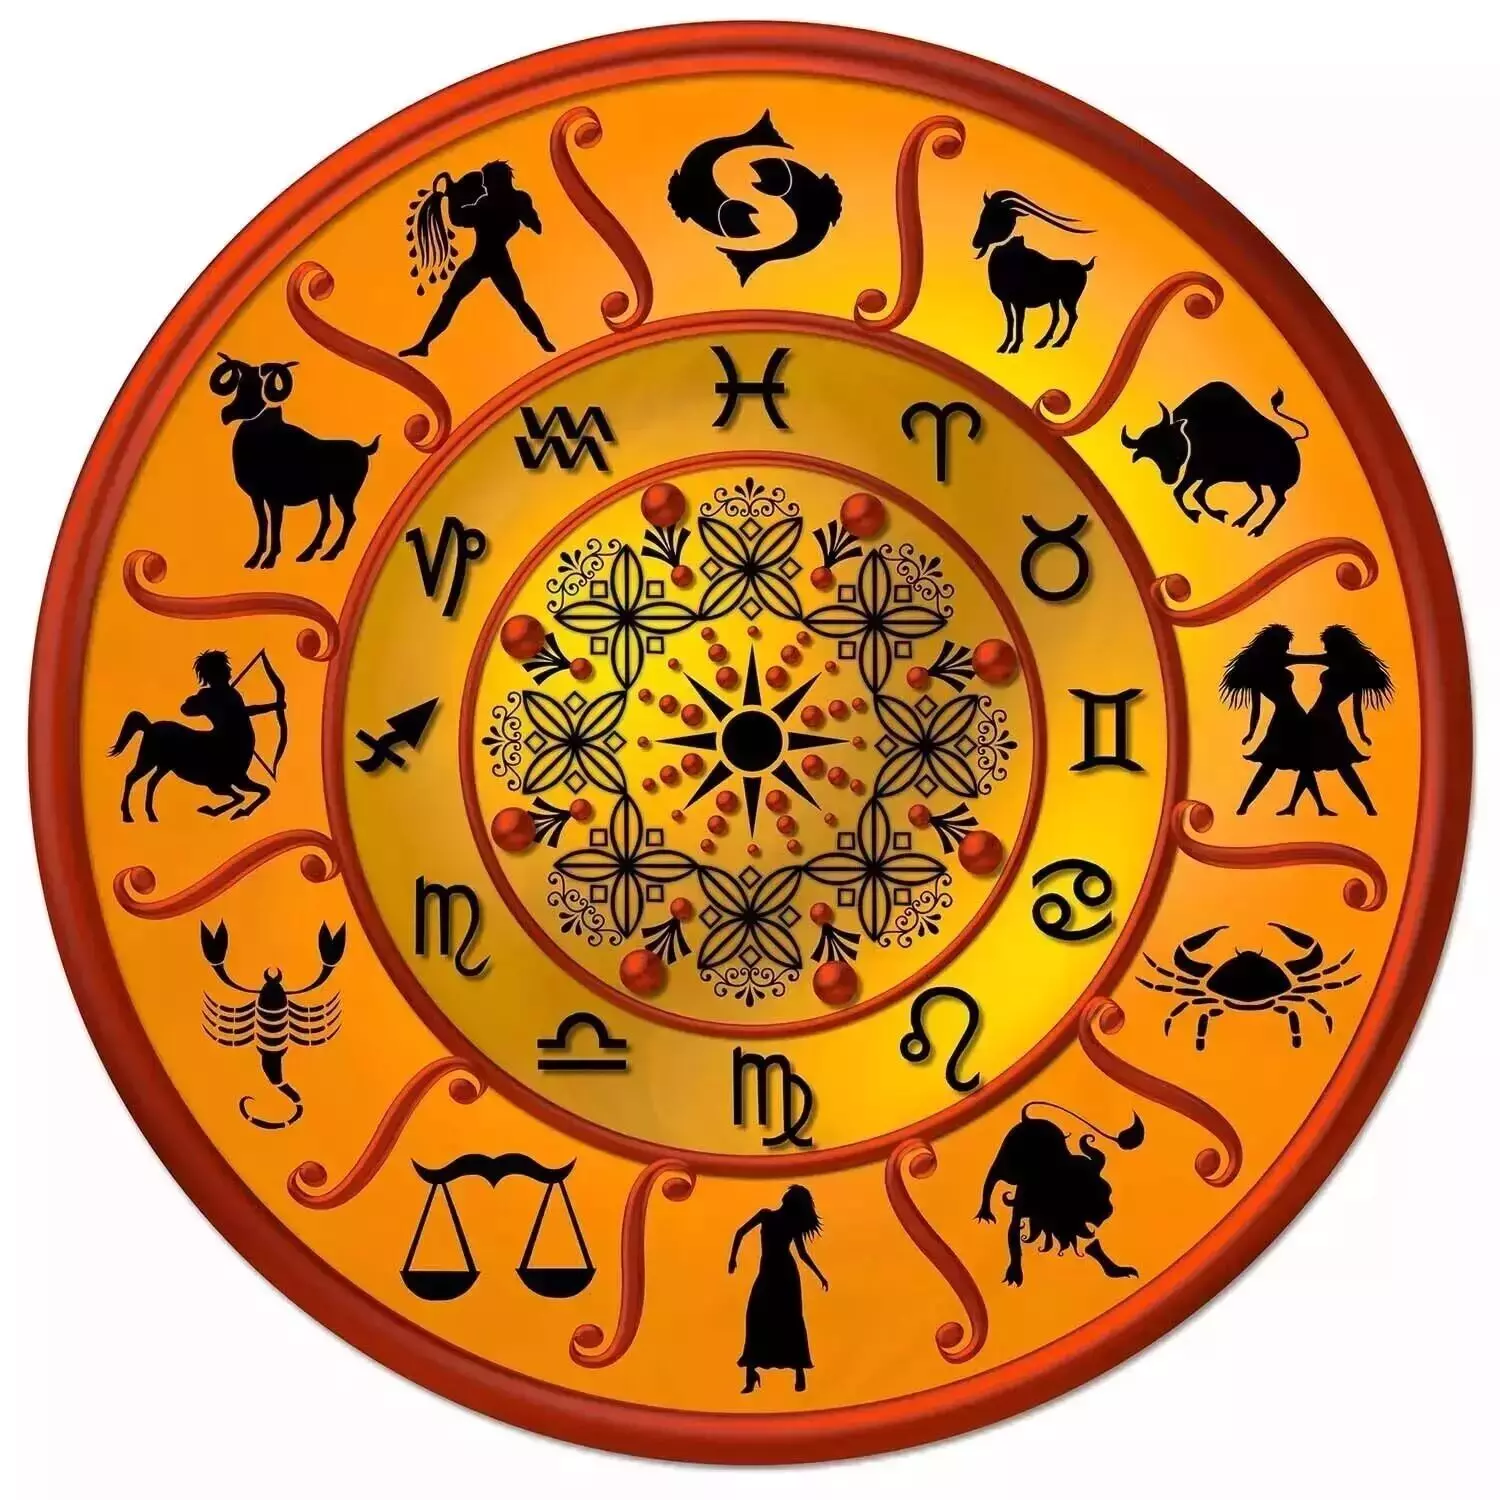 27 February  – Know your todays horoscope